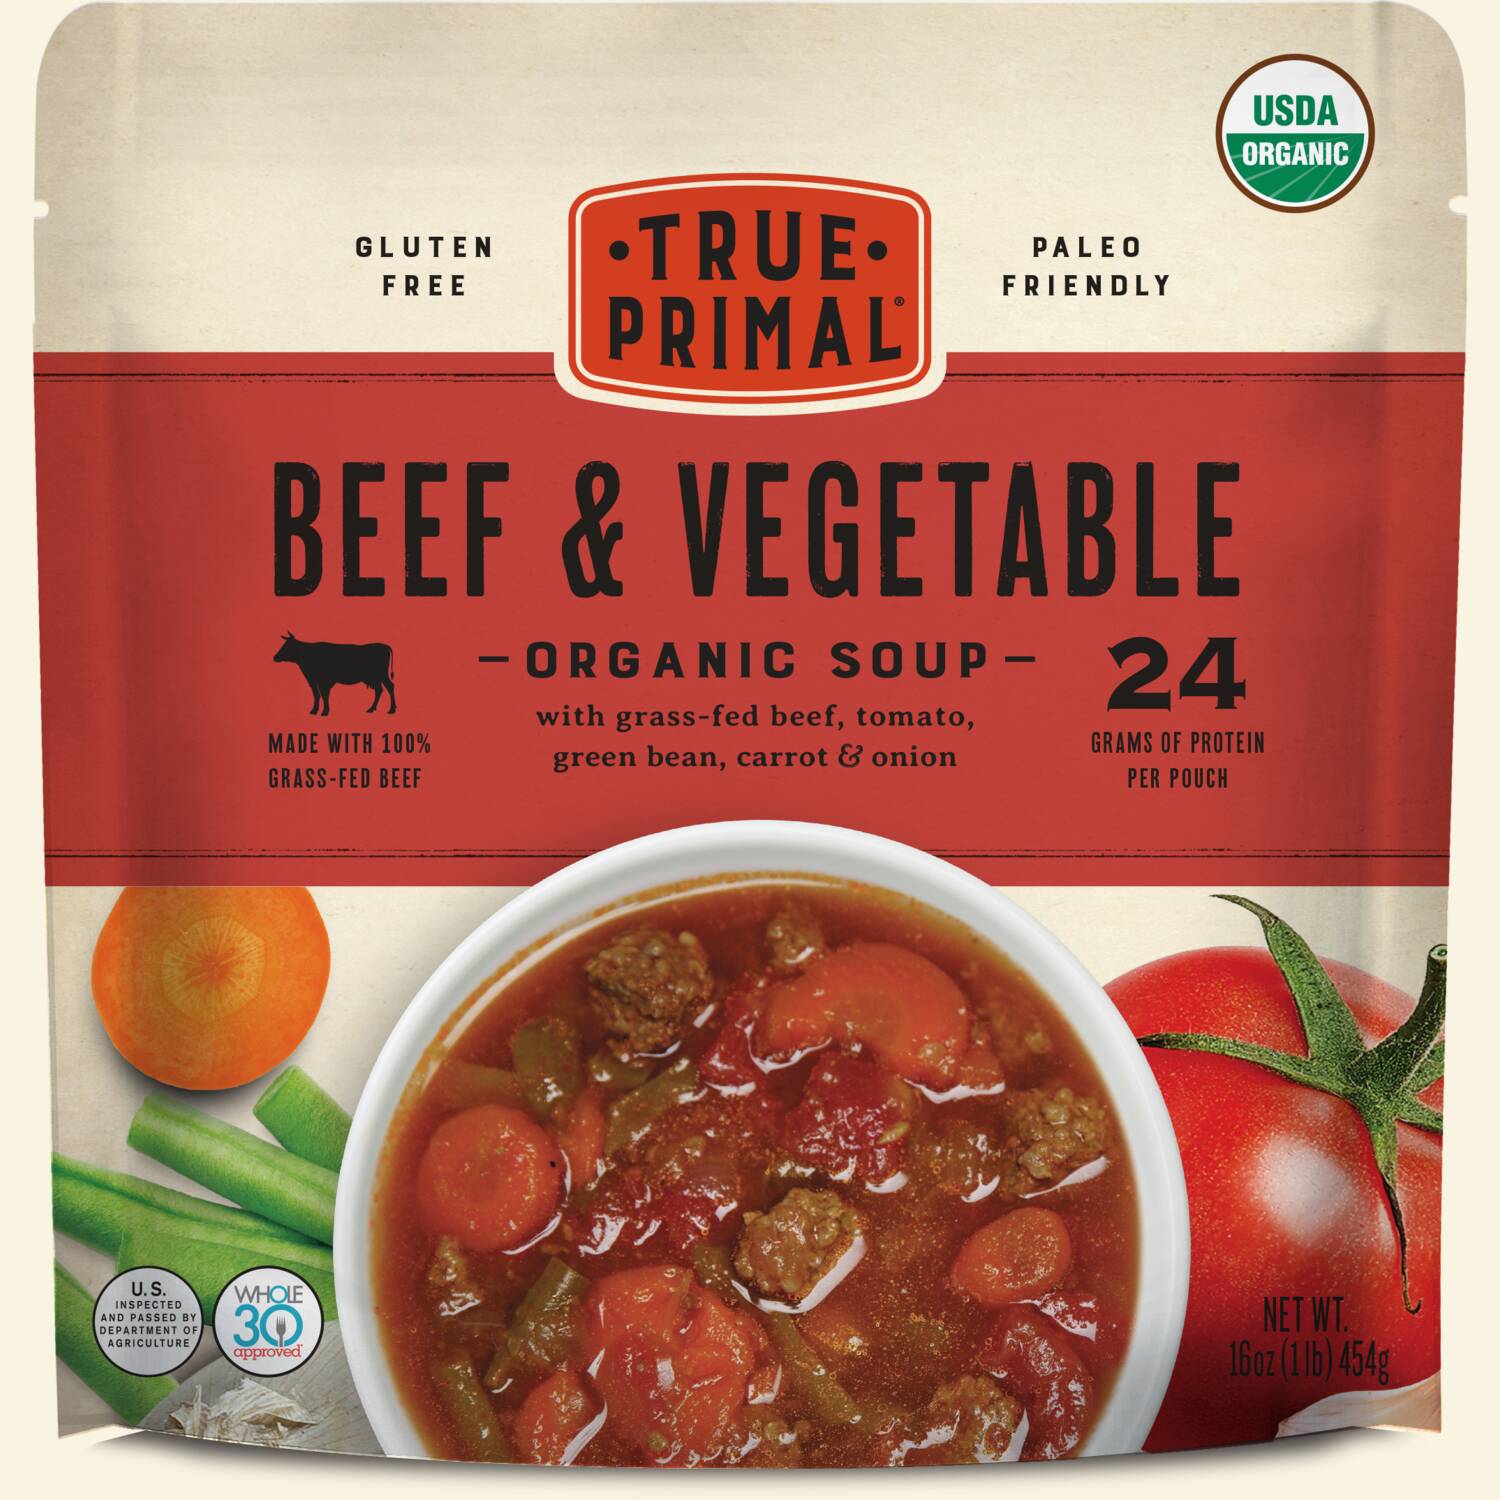 True Primal Beef and Vegetable Organic Soup in pouch, front